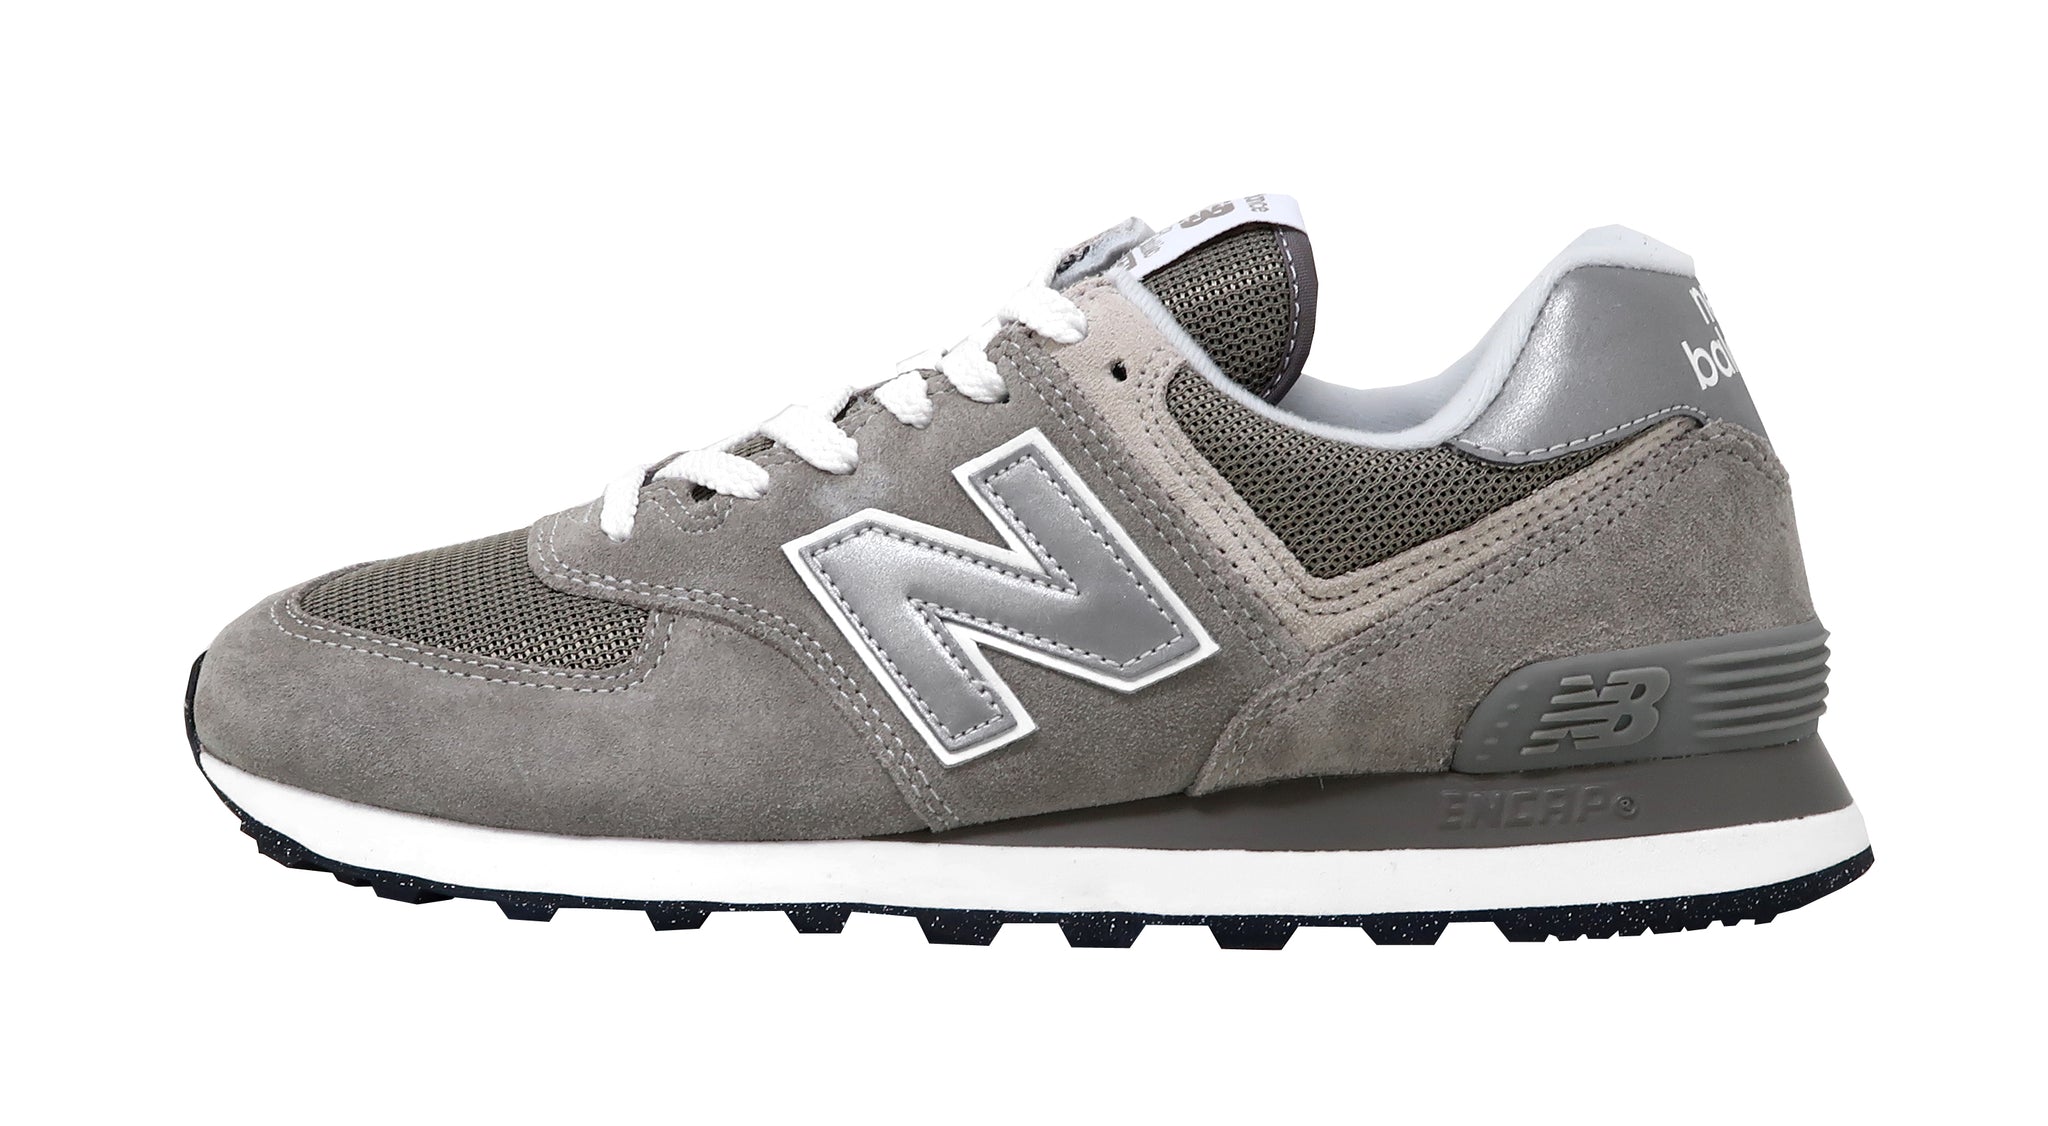 New Balance Men's Classic Traditionnels 574 Gray/White Suede Shoes